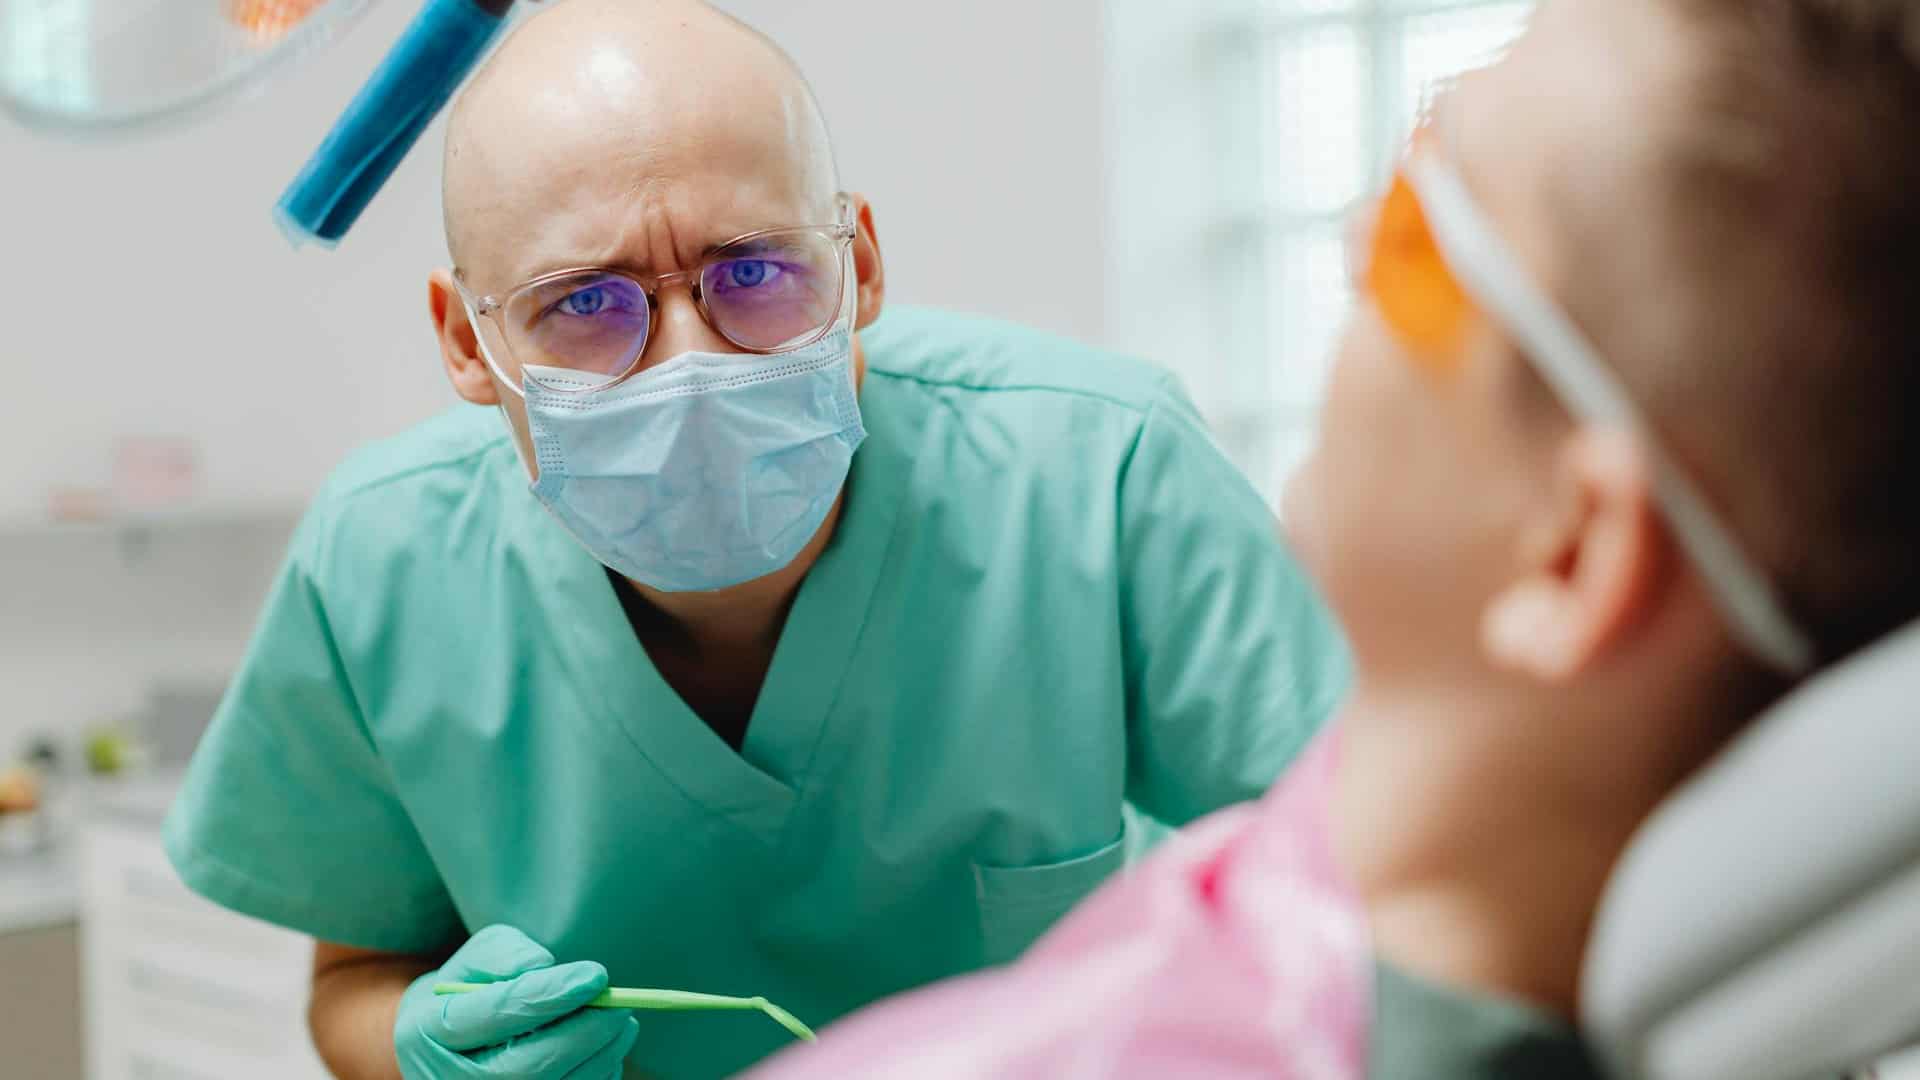 A photograph of a dental care professional looking concernedly in the direction of the viewer while treating a patient, as if disturbed by the question "what happens if you never go to the dentist"